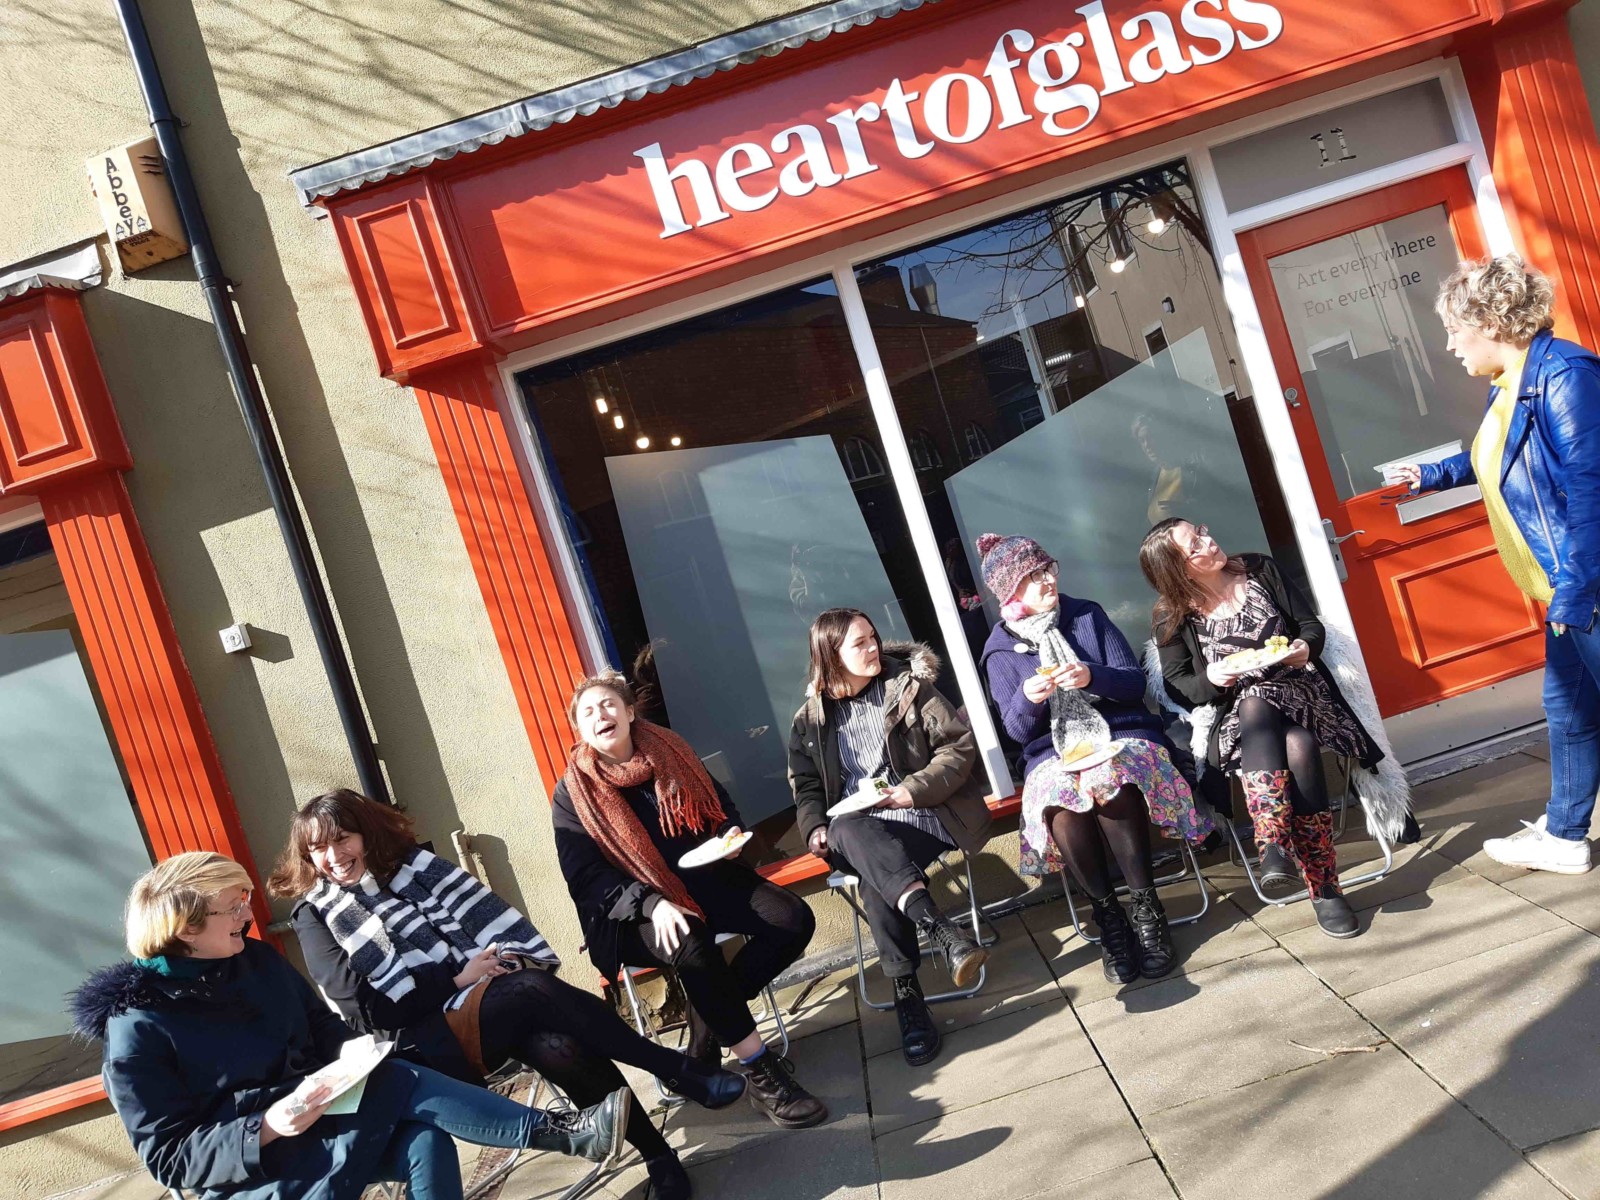 A group of people sit on chairs laughing and chatting in the sun outside the Heart of Glass office.